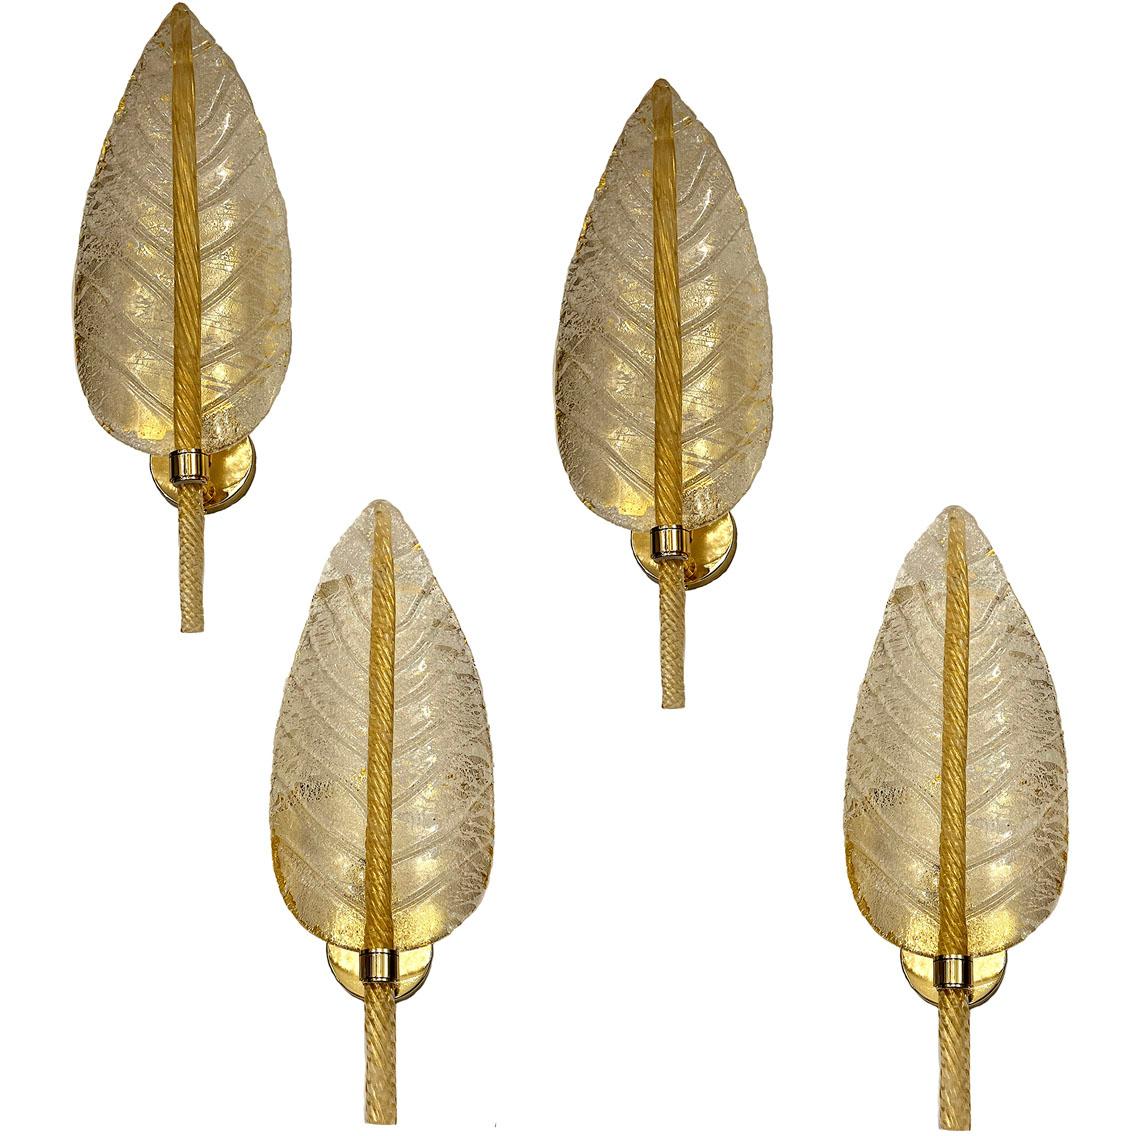 A set of 4 midcentury blown glass sconces in gold and clear glass. Sold per pair.

Measurements:
Height: 24